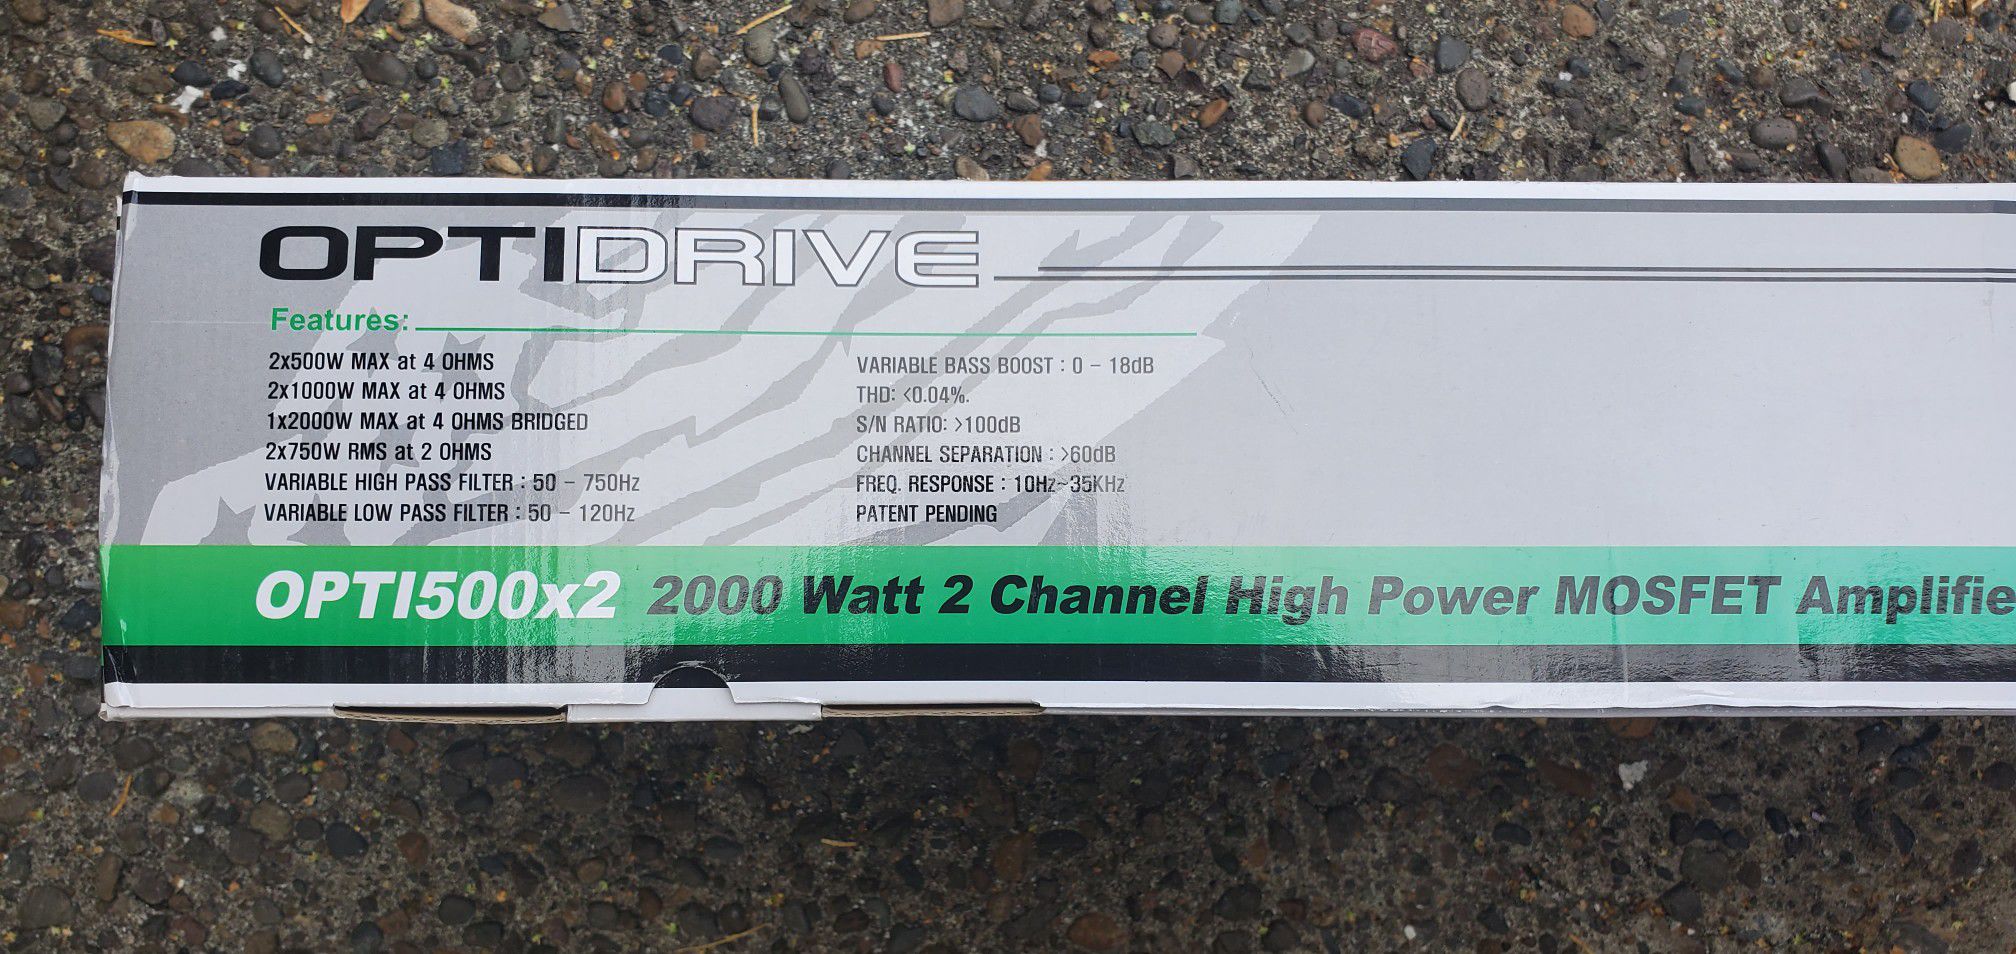 2000w 2 channel amp for trade or sale